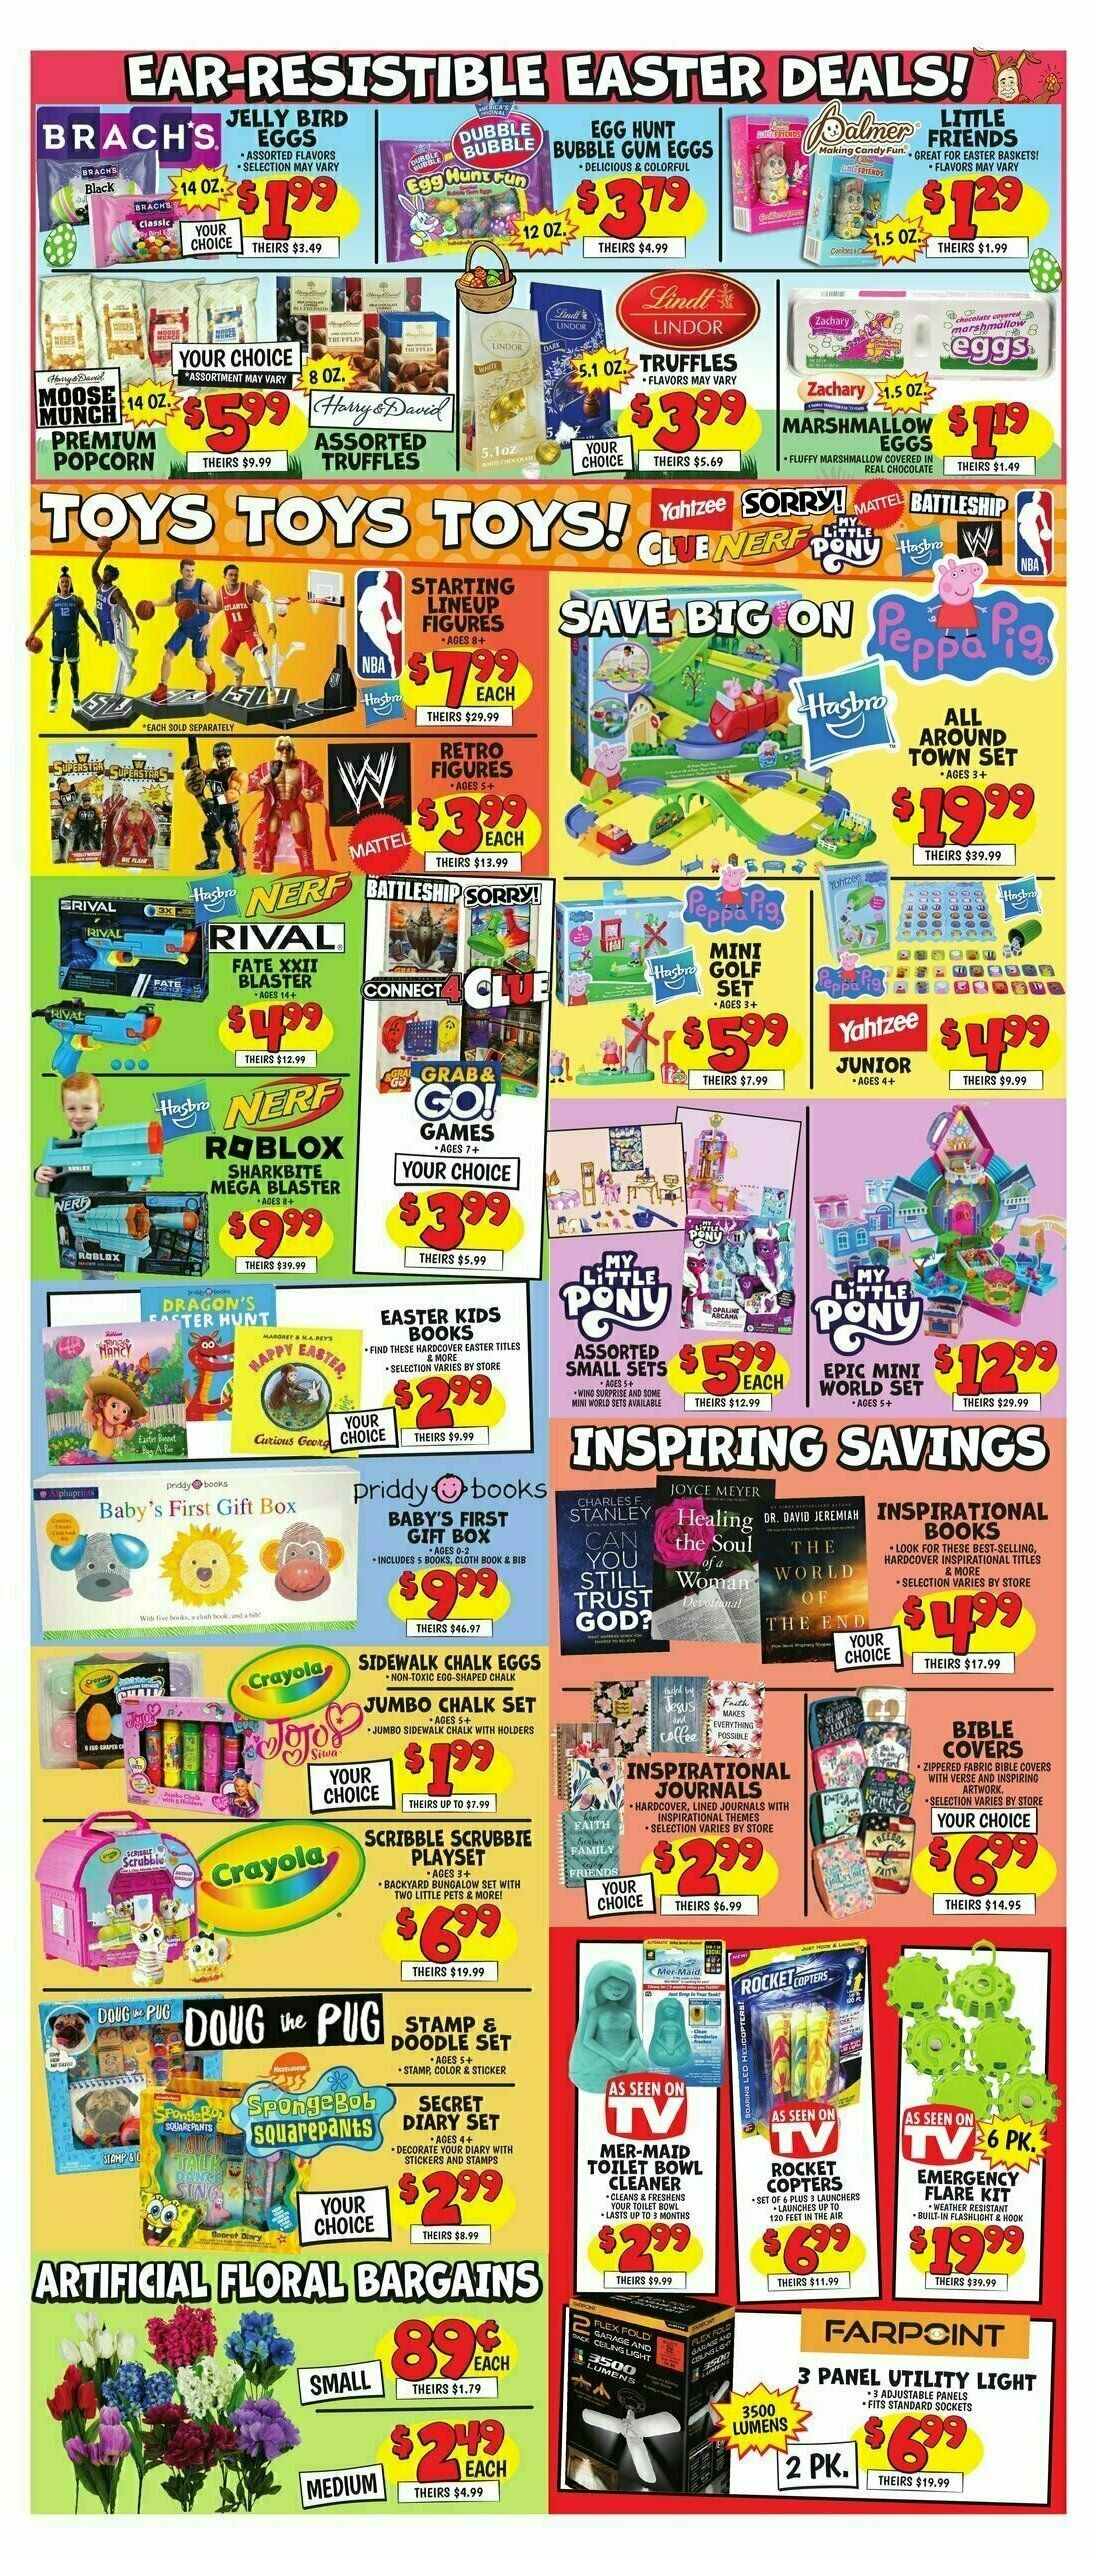 Ollie's Bargain Outlet Weekly Ad from March 13